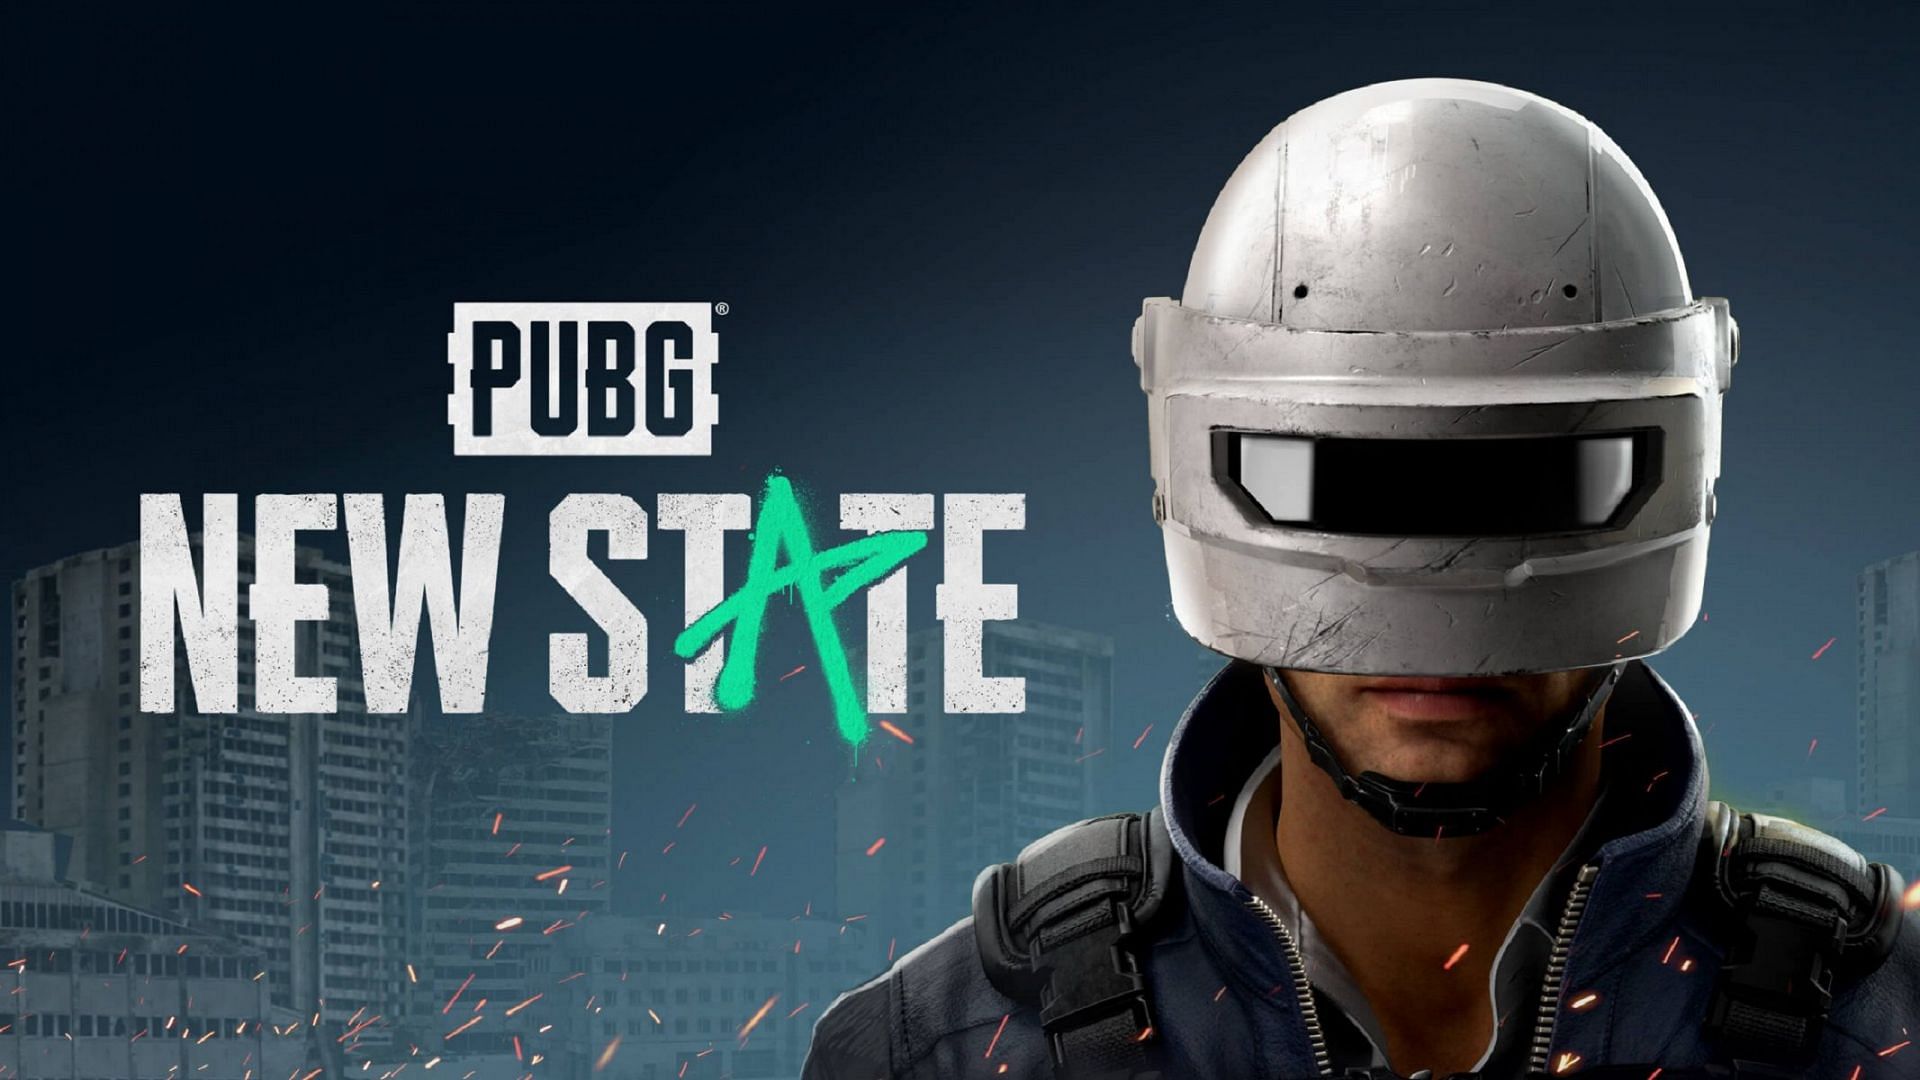 A lot of issues have been faced by the players (Image via PUBG New State)